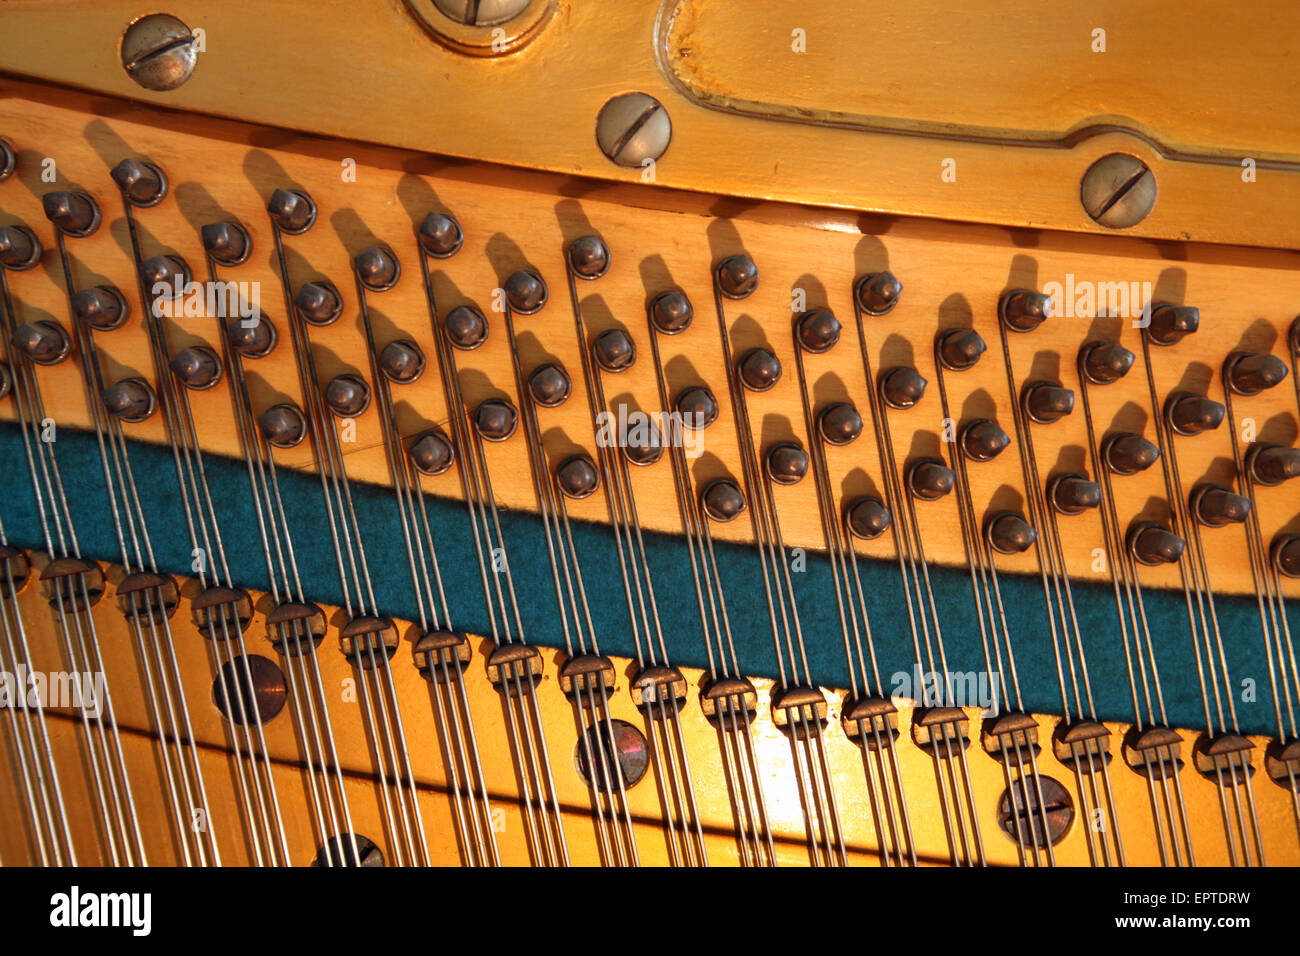 the strings, tuning pins and soundboard inside a Bechstein upright piano Stock Photo